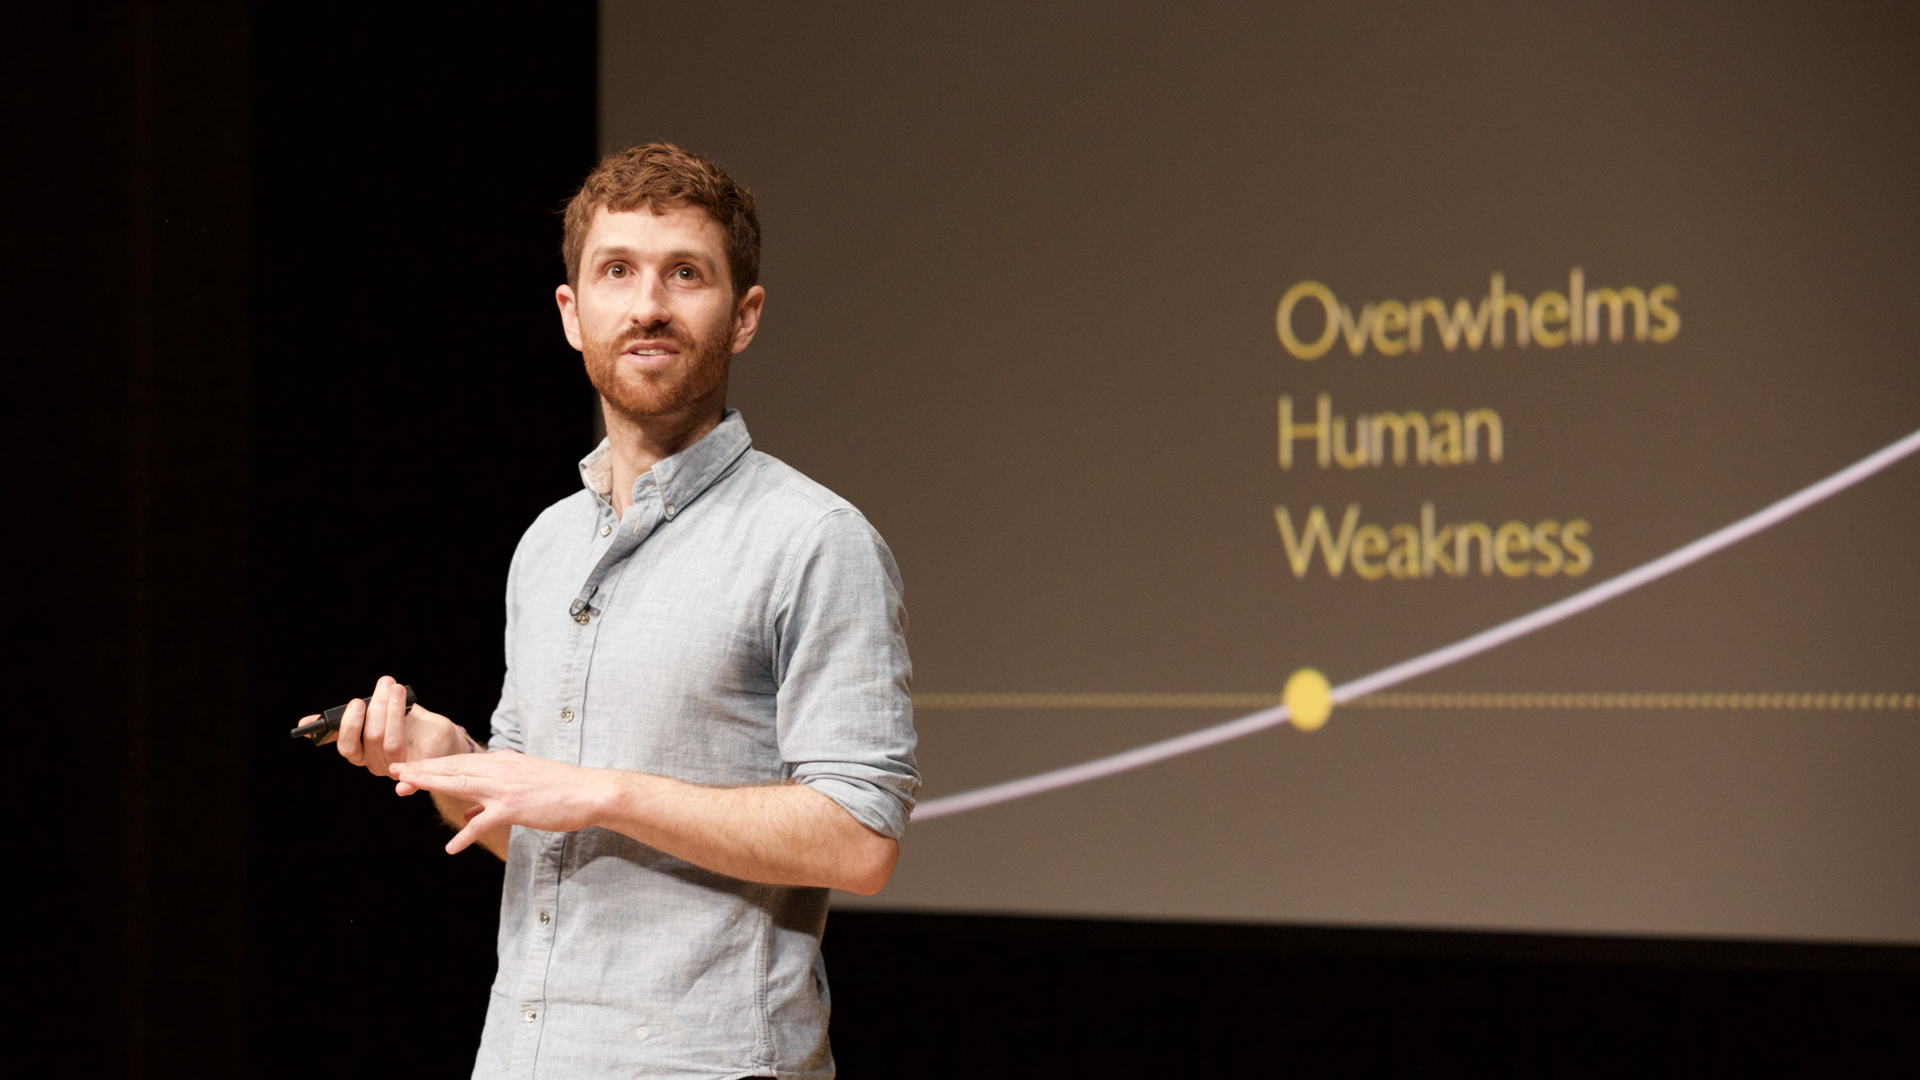 Center for Humane Technology co-founder Tristan Harris, speaking Tuesday in San Francisco